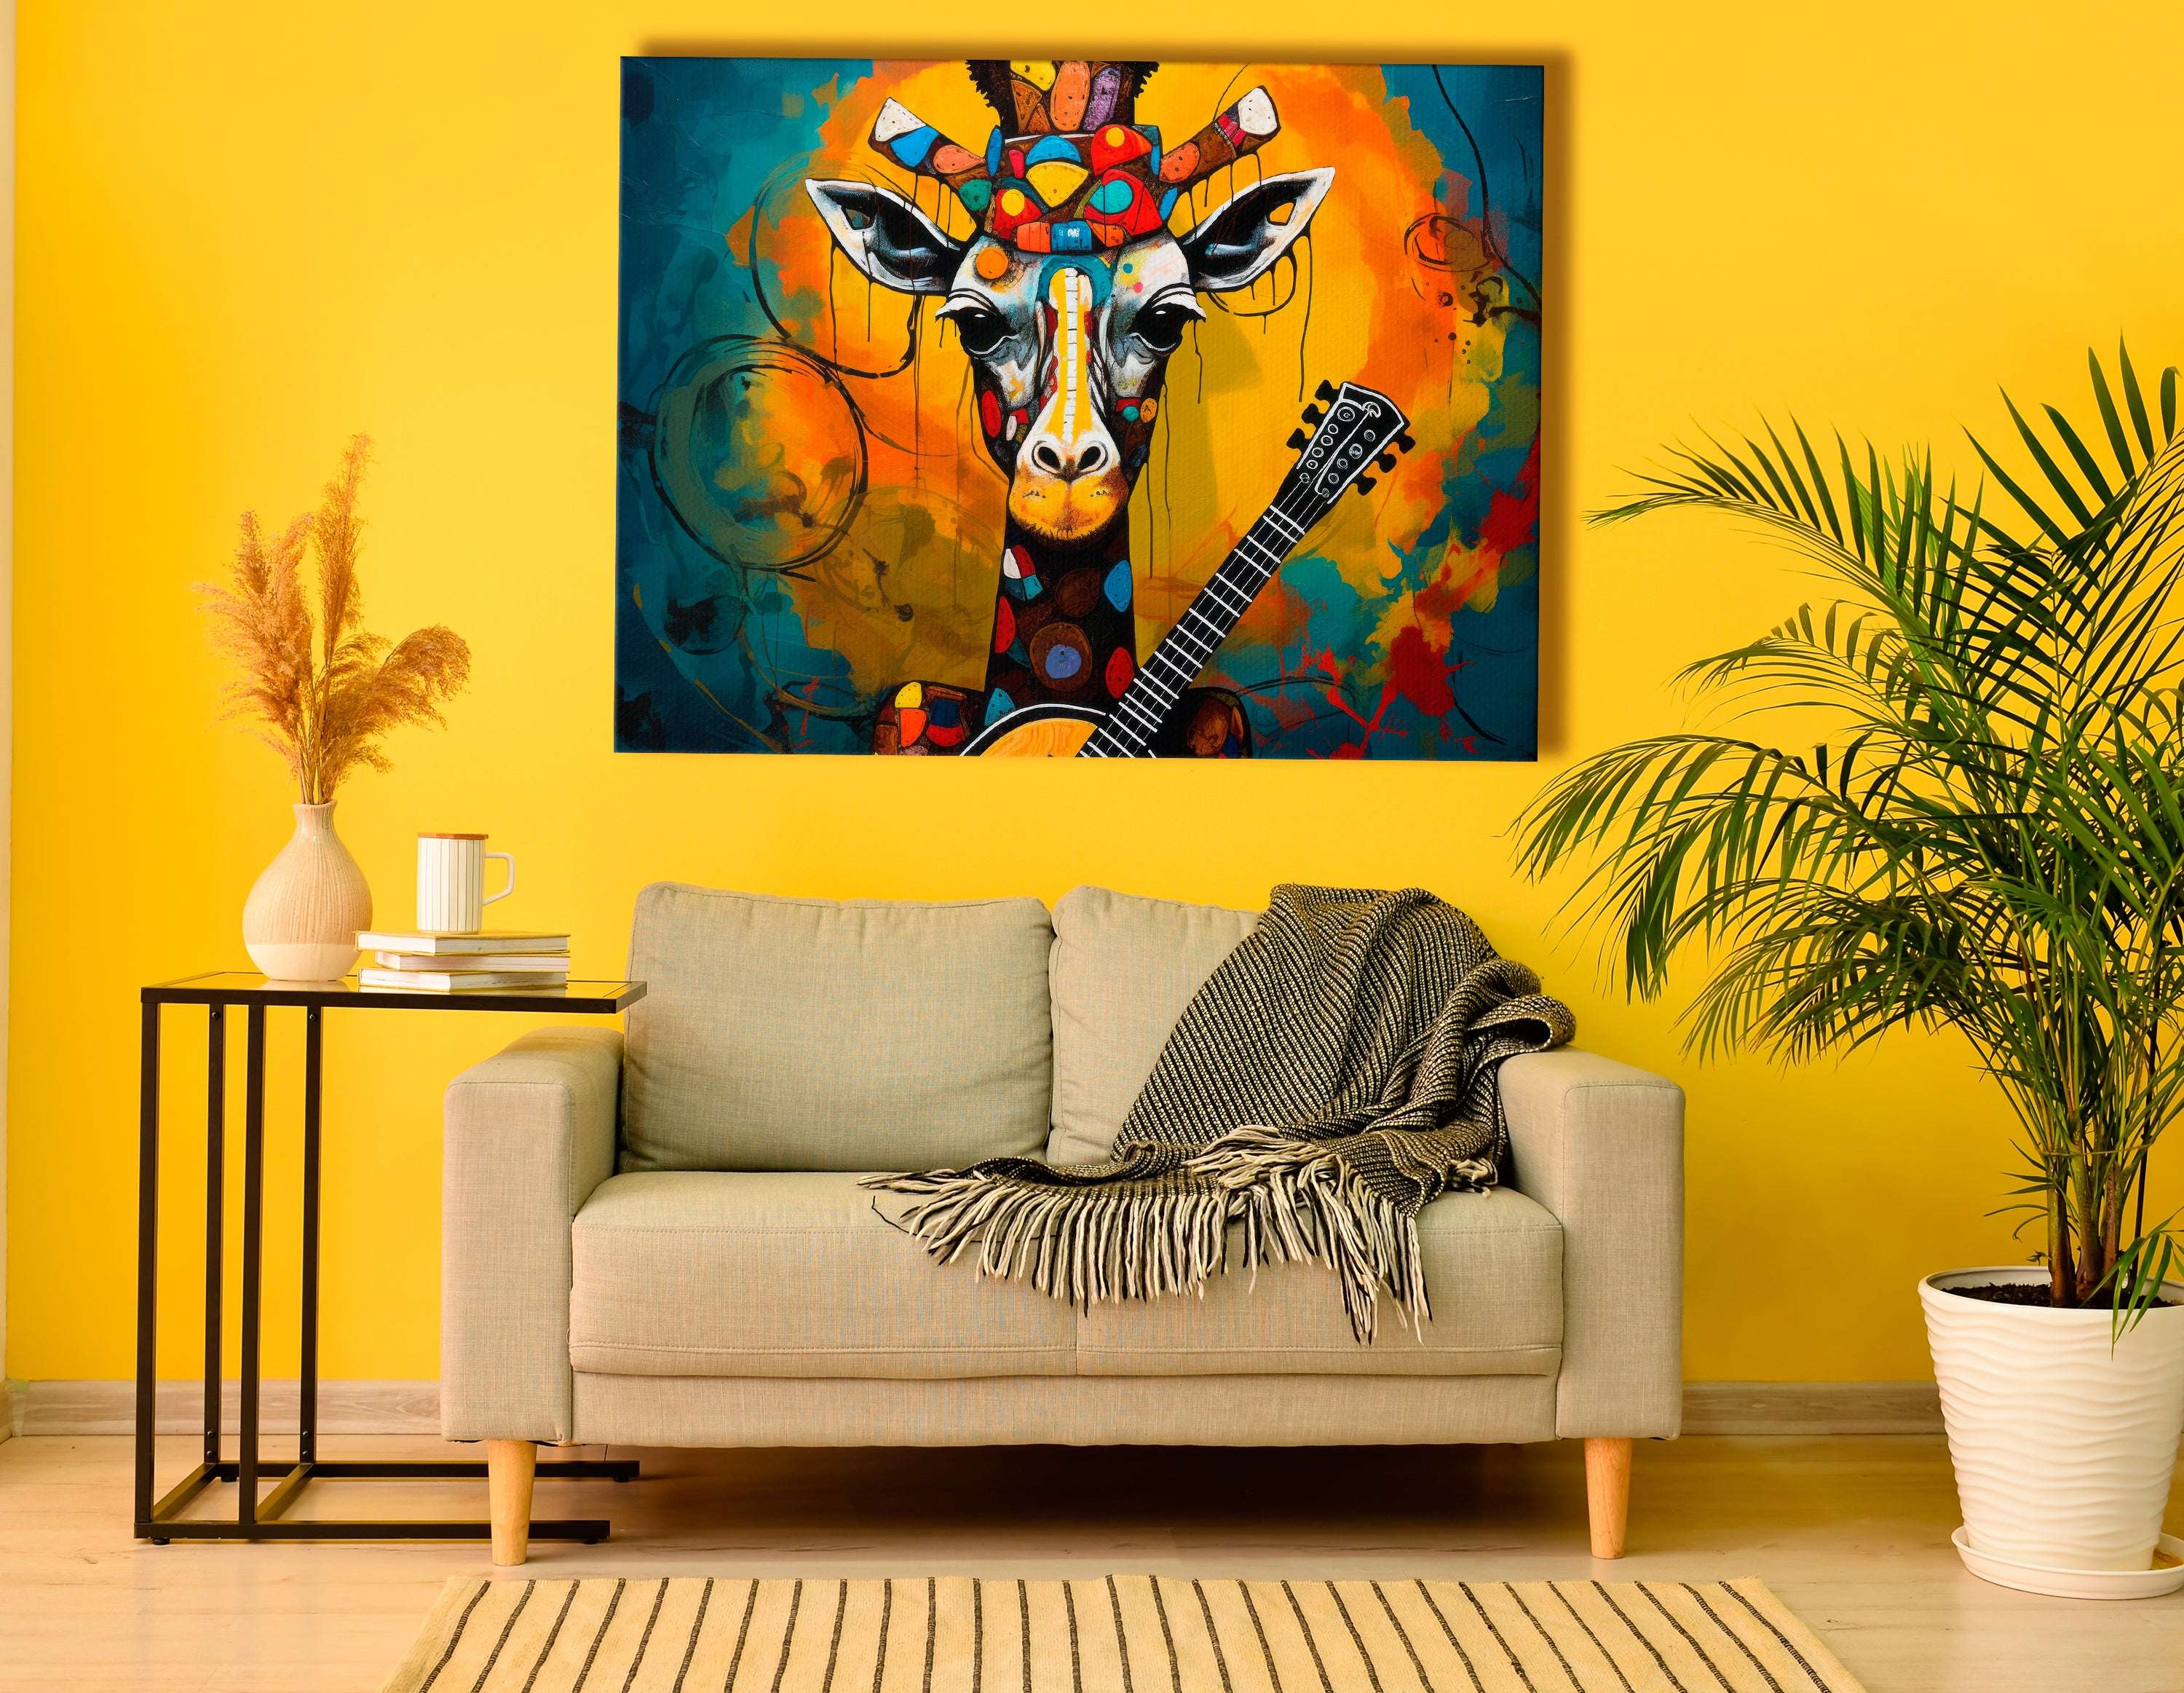 Banjo-Playing Giraffe in a Whirl of Colorful Splashes - Canvas Print - Artoholica Ready to Hang Canvas Print